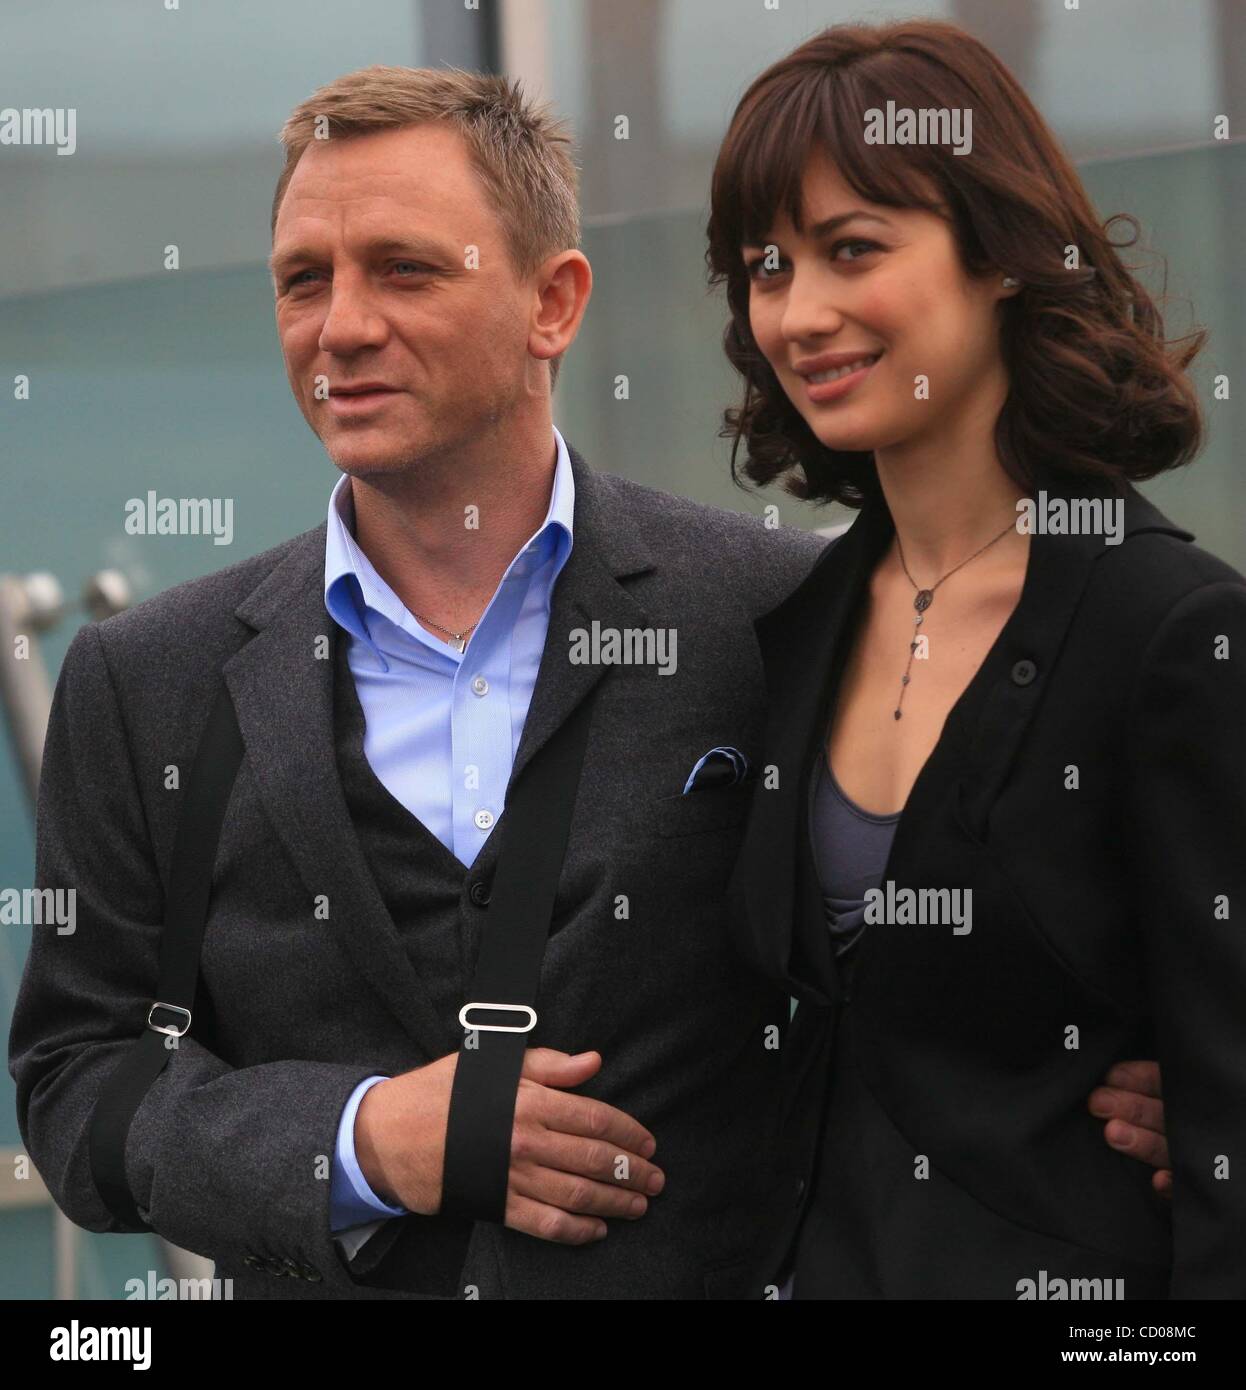 Oct 13, 2008 - Moscow, Russia - Actor DANIEL CRAIG promoting new Bond ...